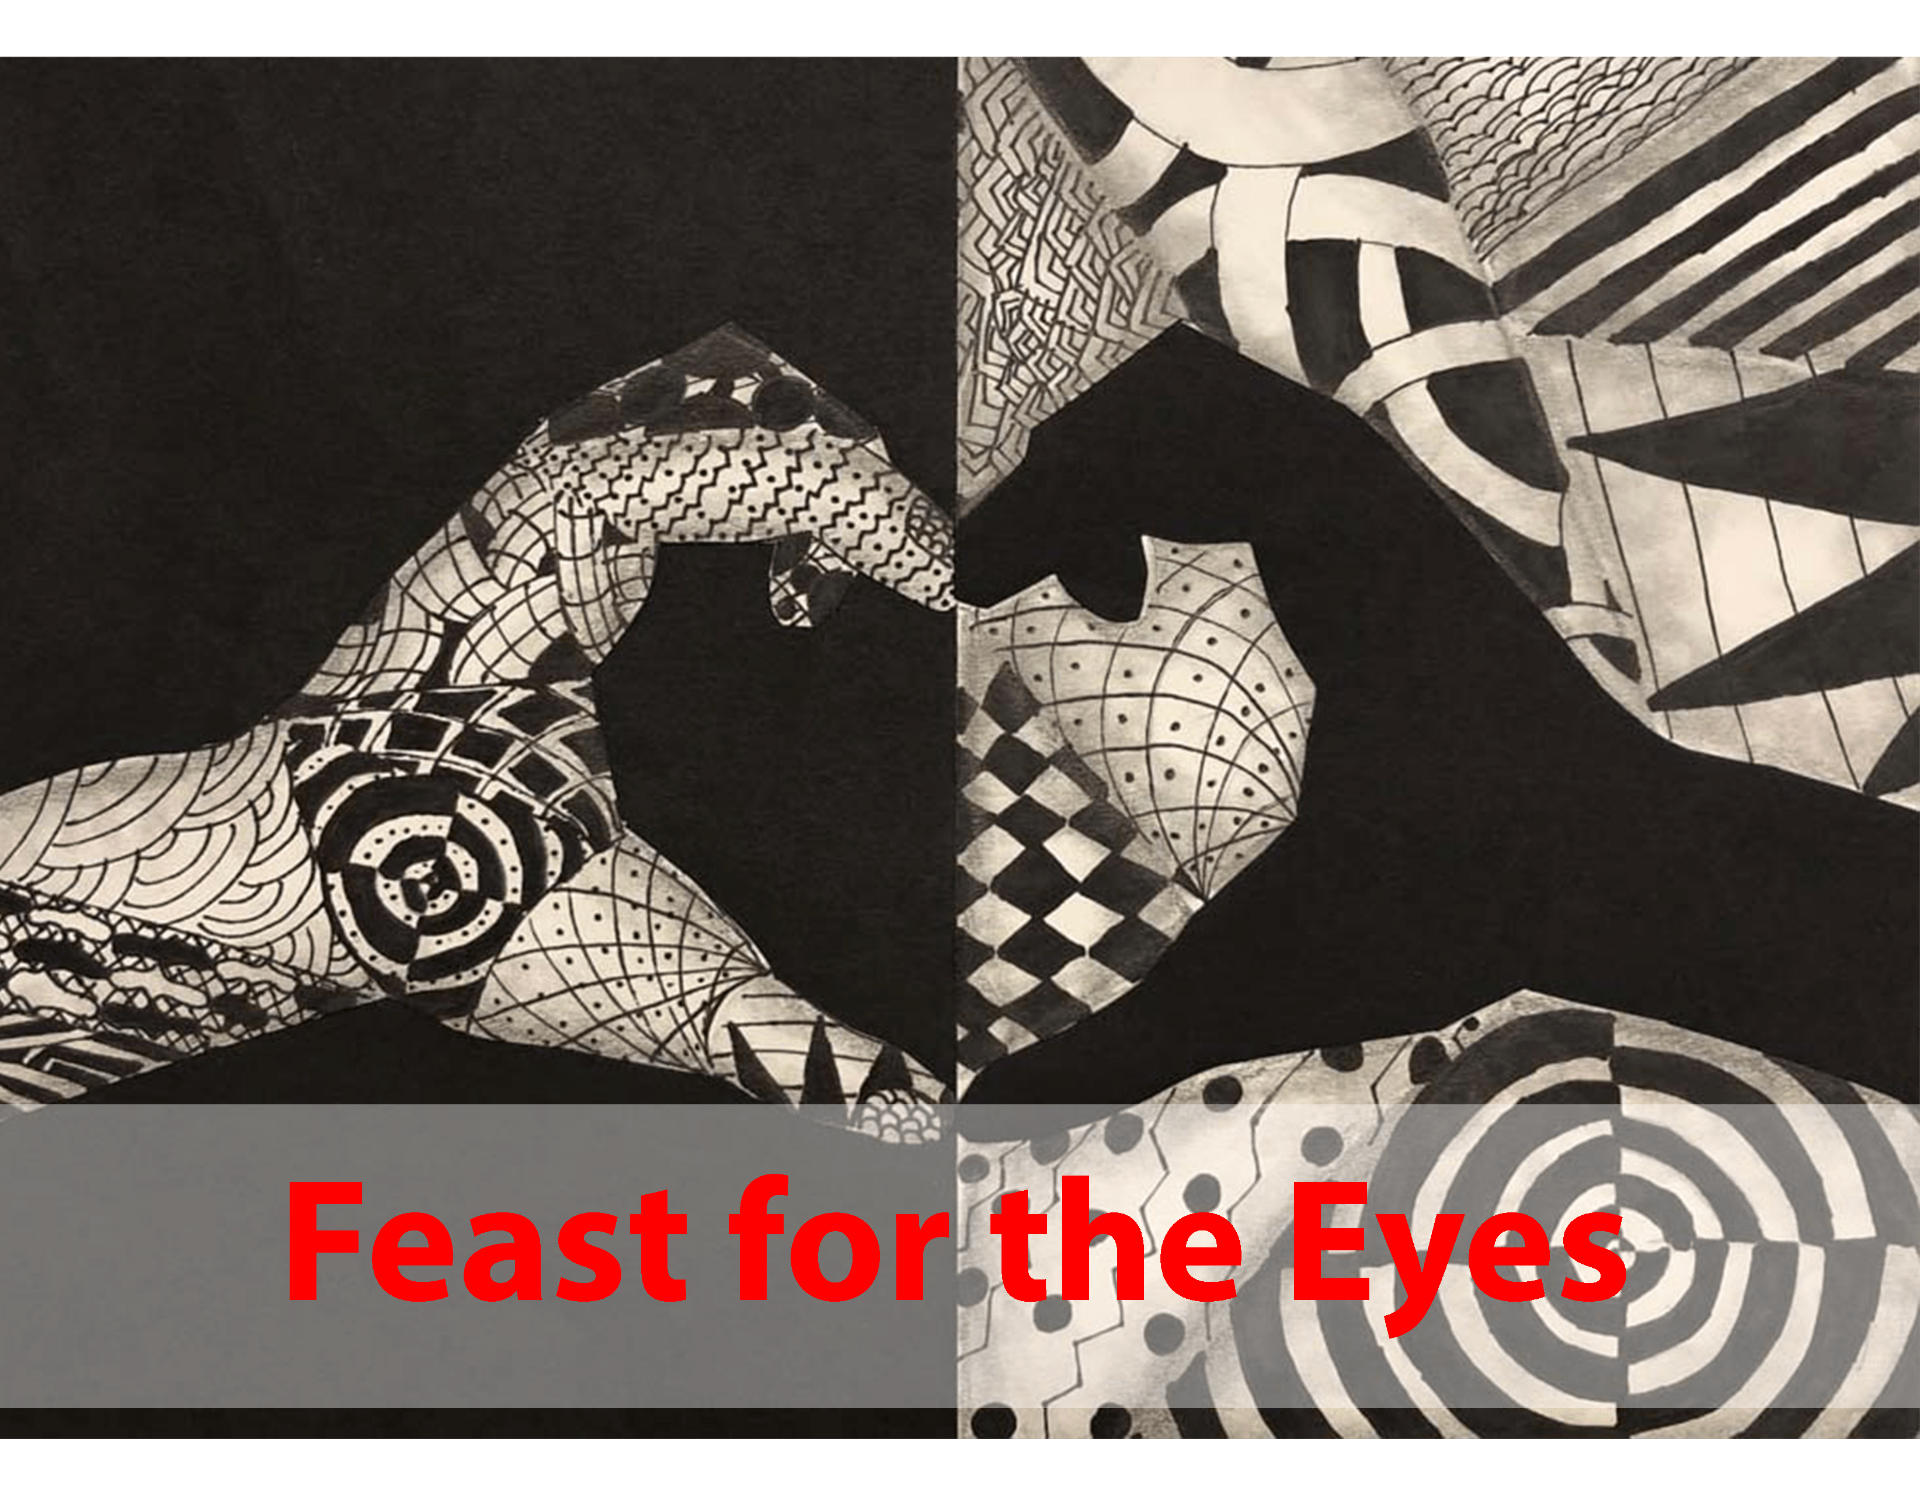 Feast for the Eyes: The 19th Annual Round Rock ISD Secondary Art Show